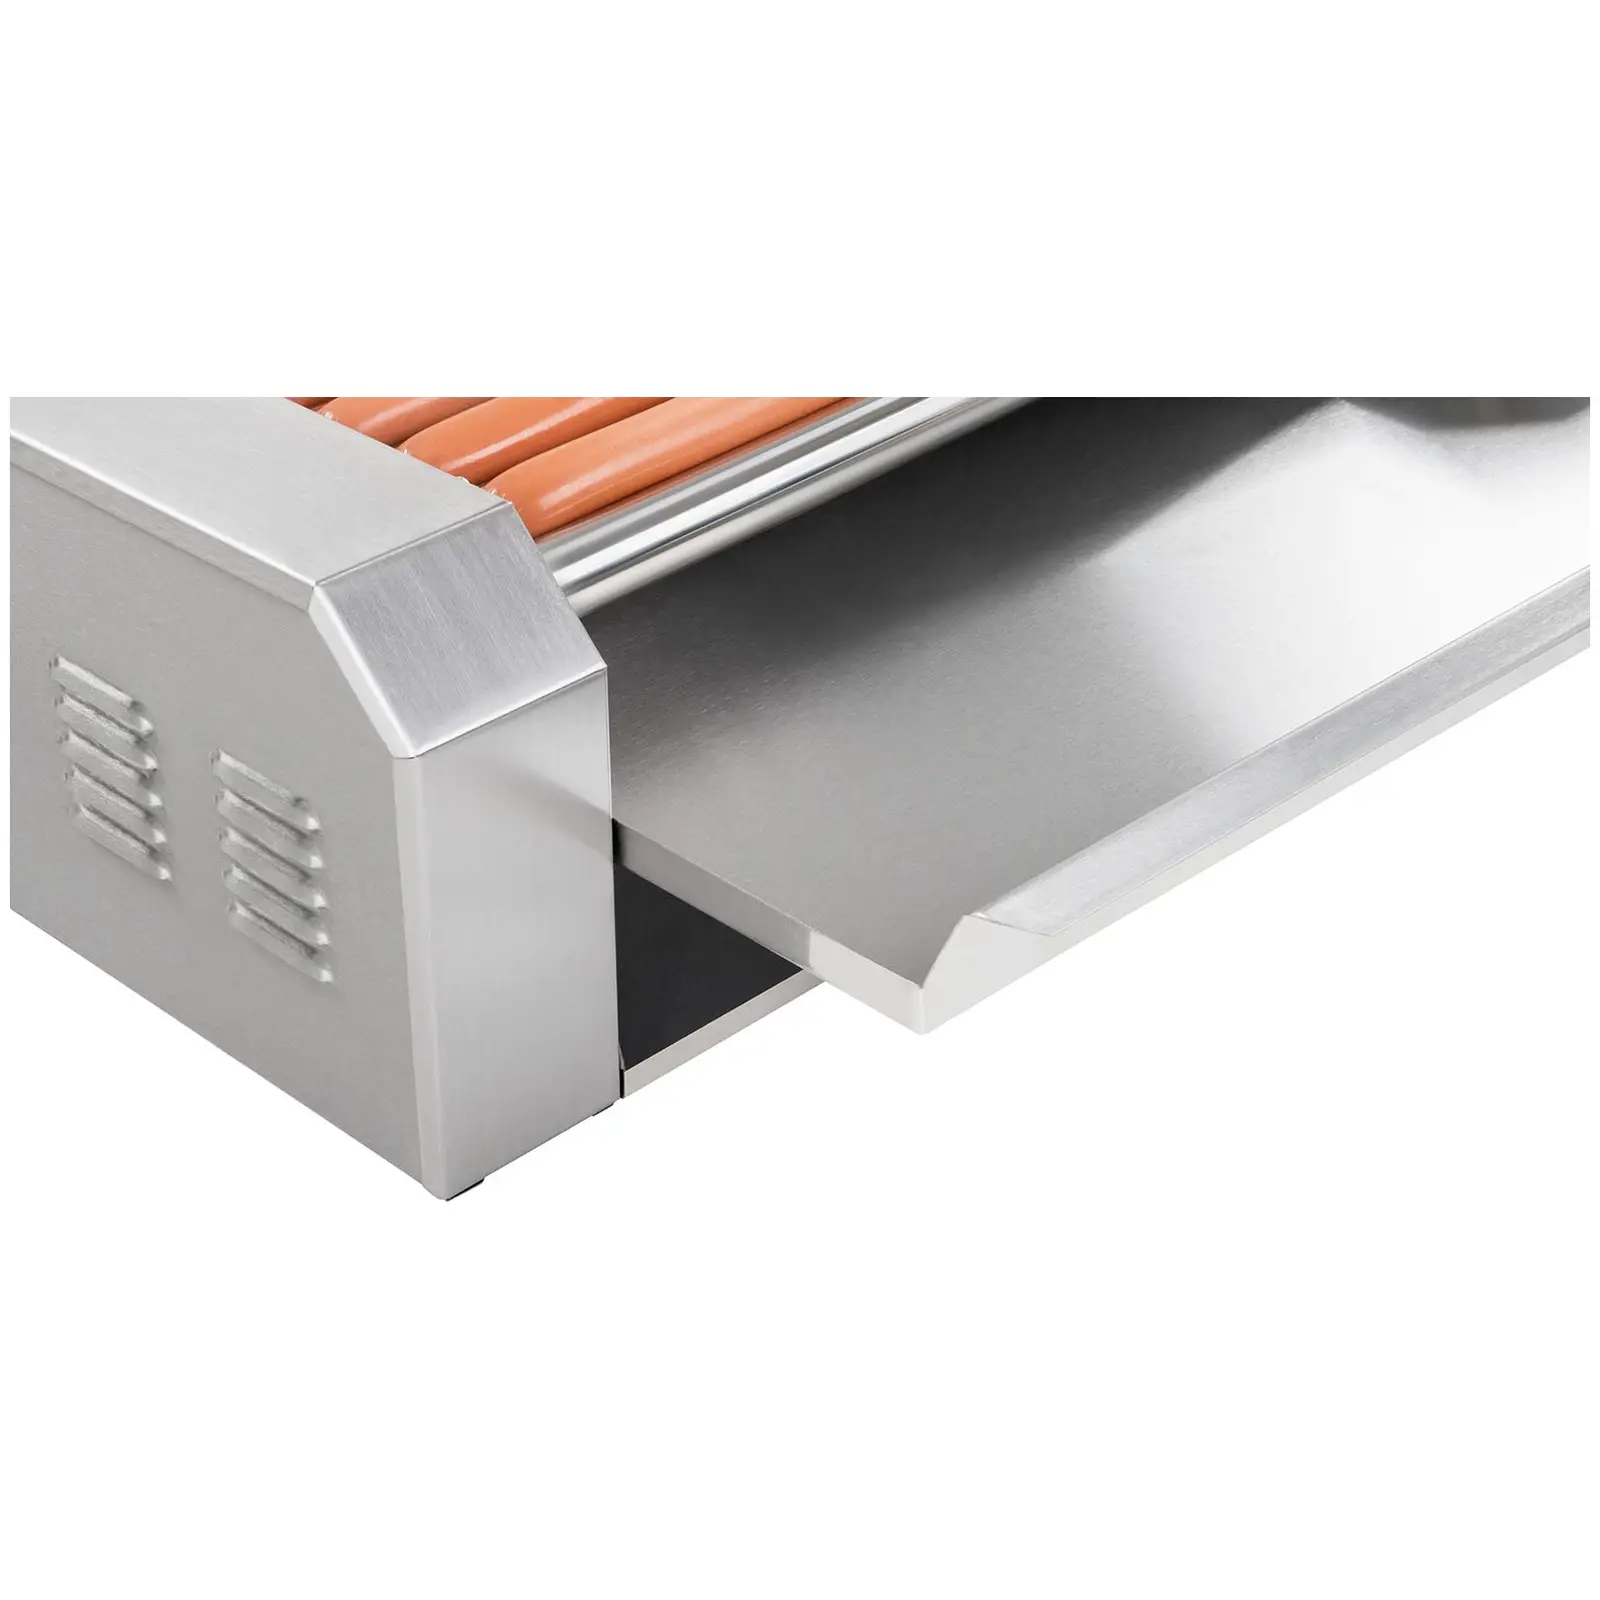 Hot Dog Grill - 9 rollers - stainless steel